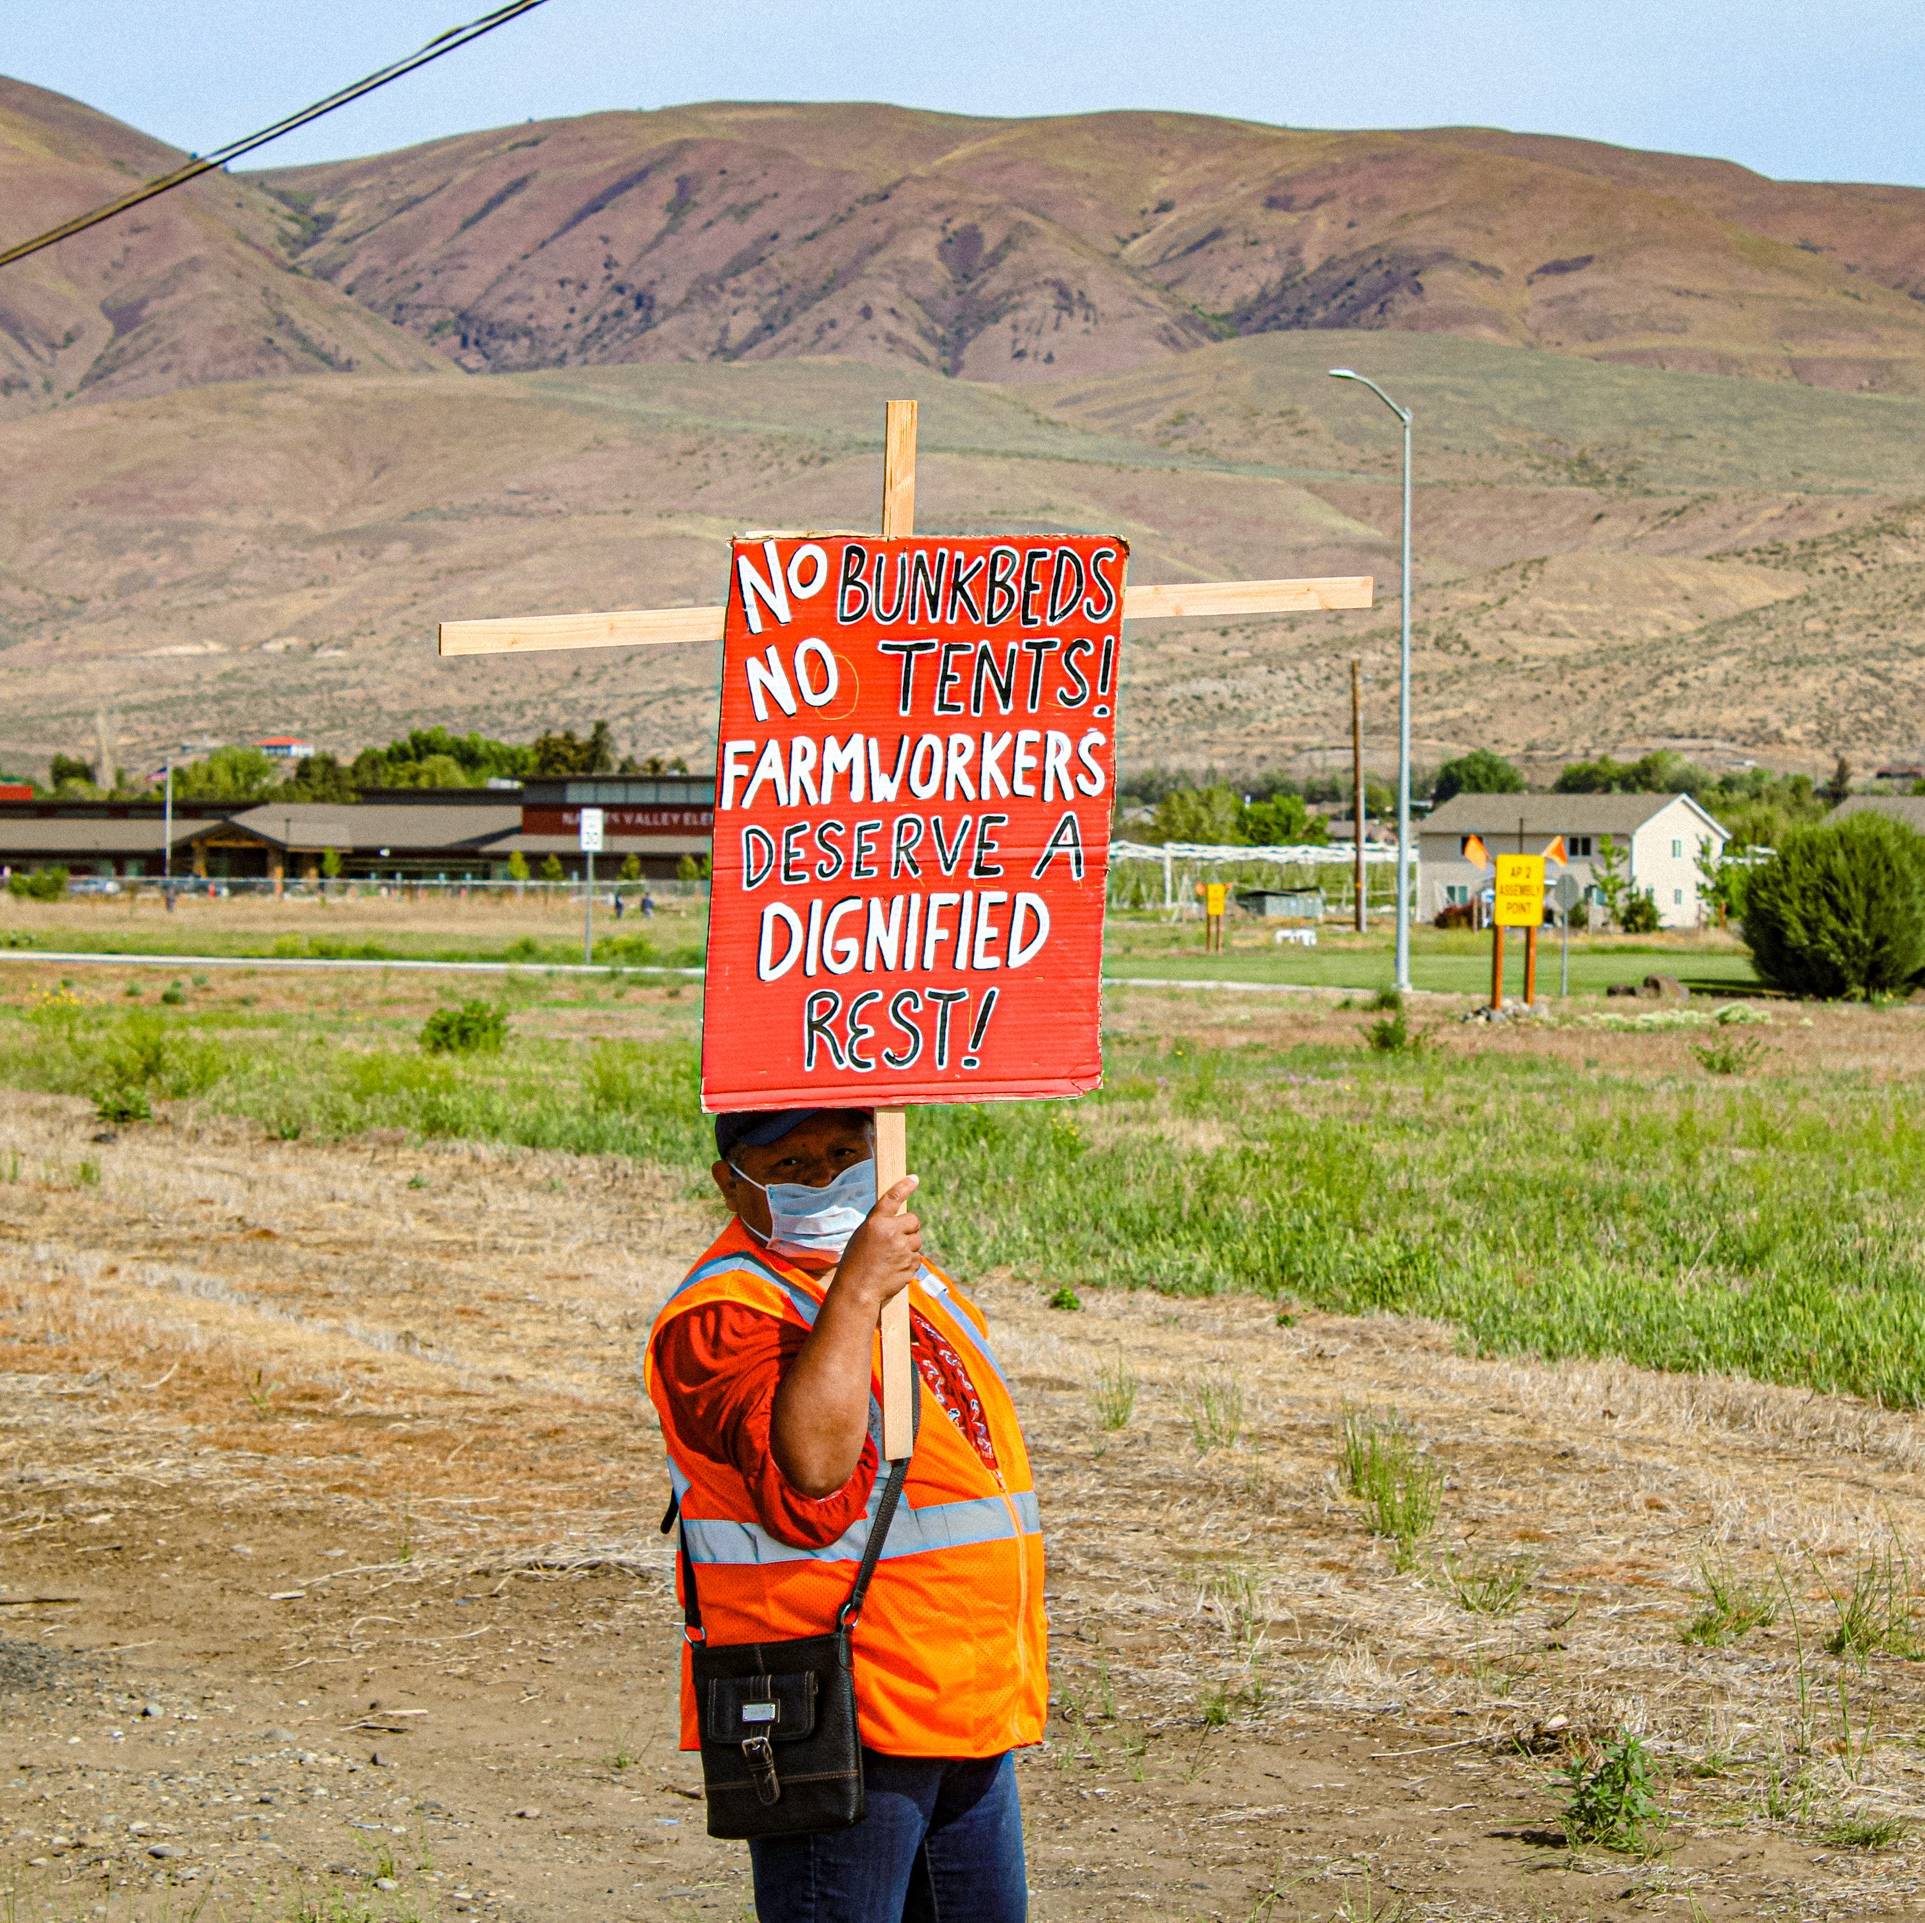 A person demonstrating at a farm holding a sign that reads “No bunkbeds, no tents, farmworkers deserve dignified rest!”